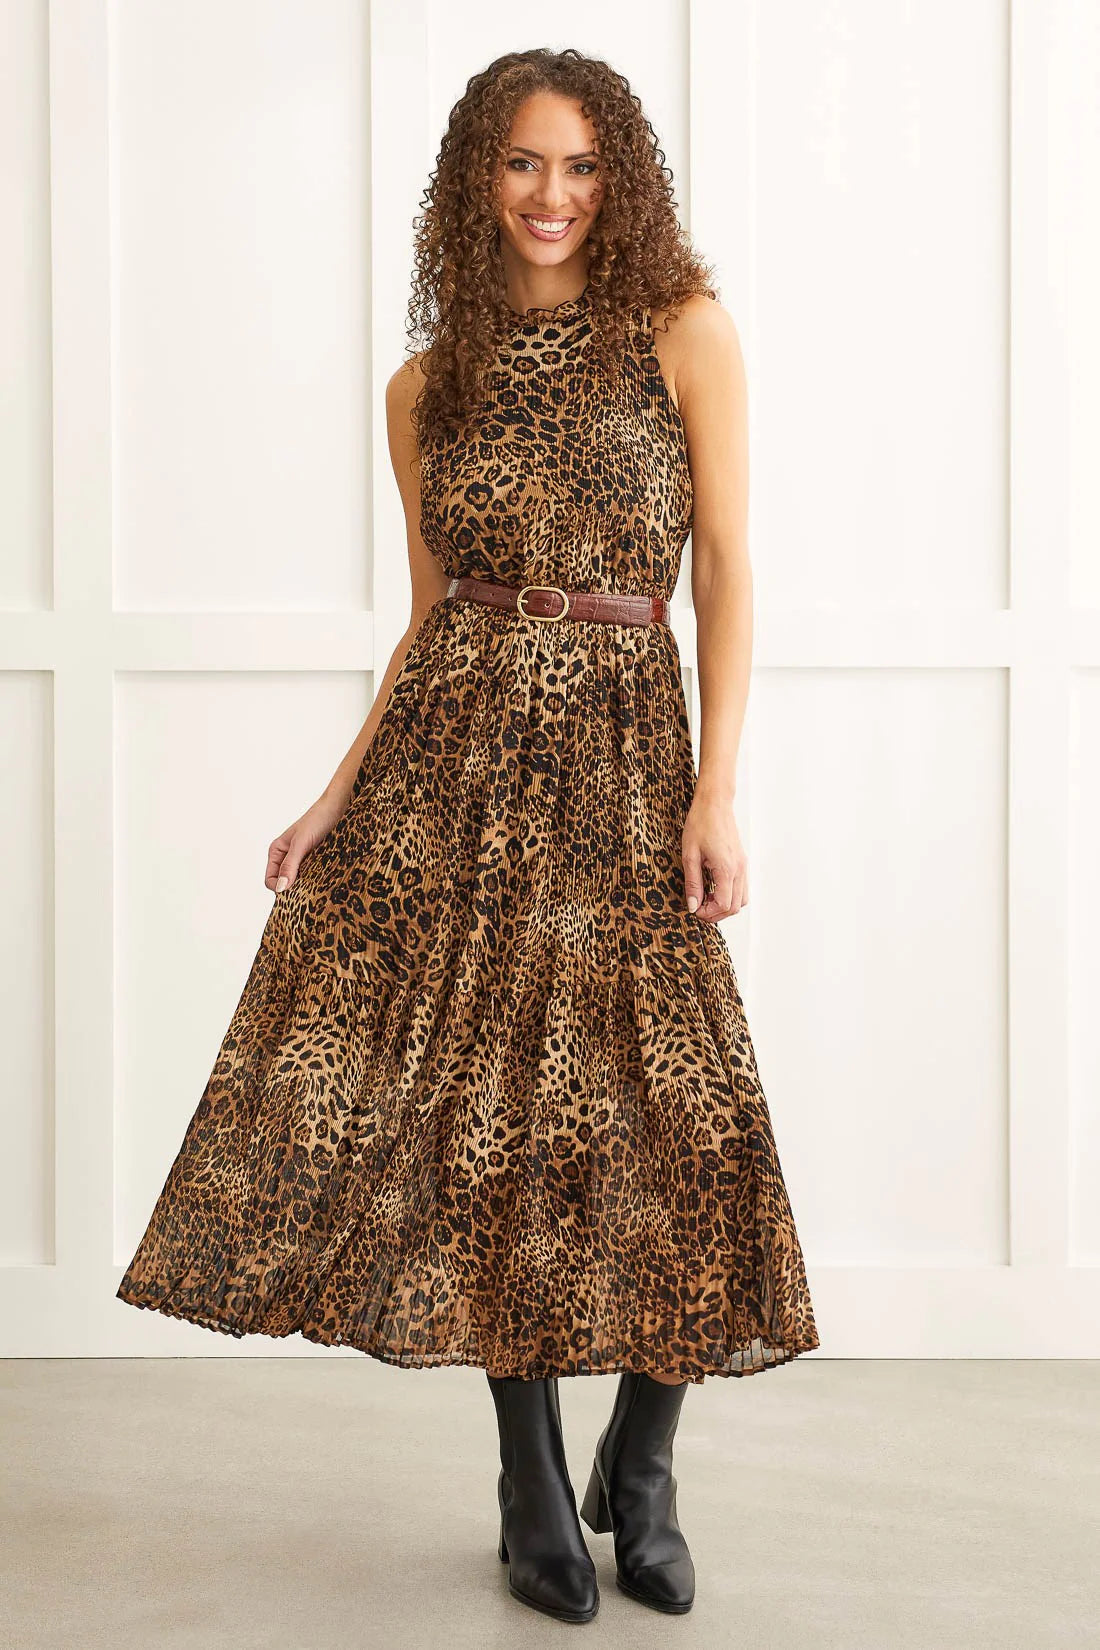 With crinkled plisse fabric and a lively animal print design, this maxi dress is getting all the style points.